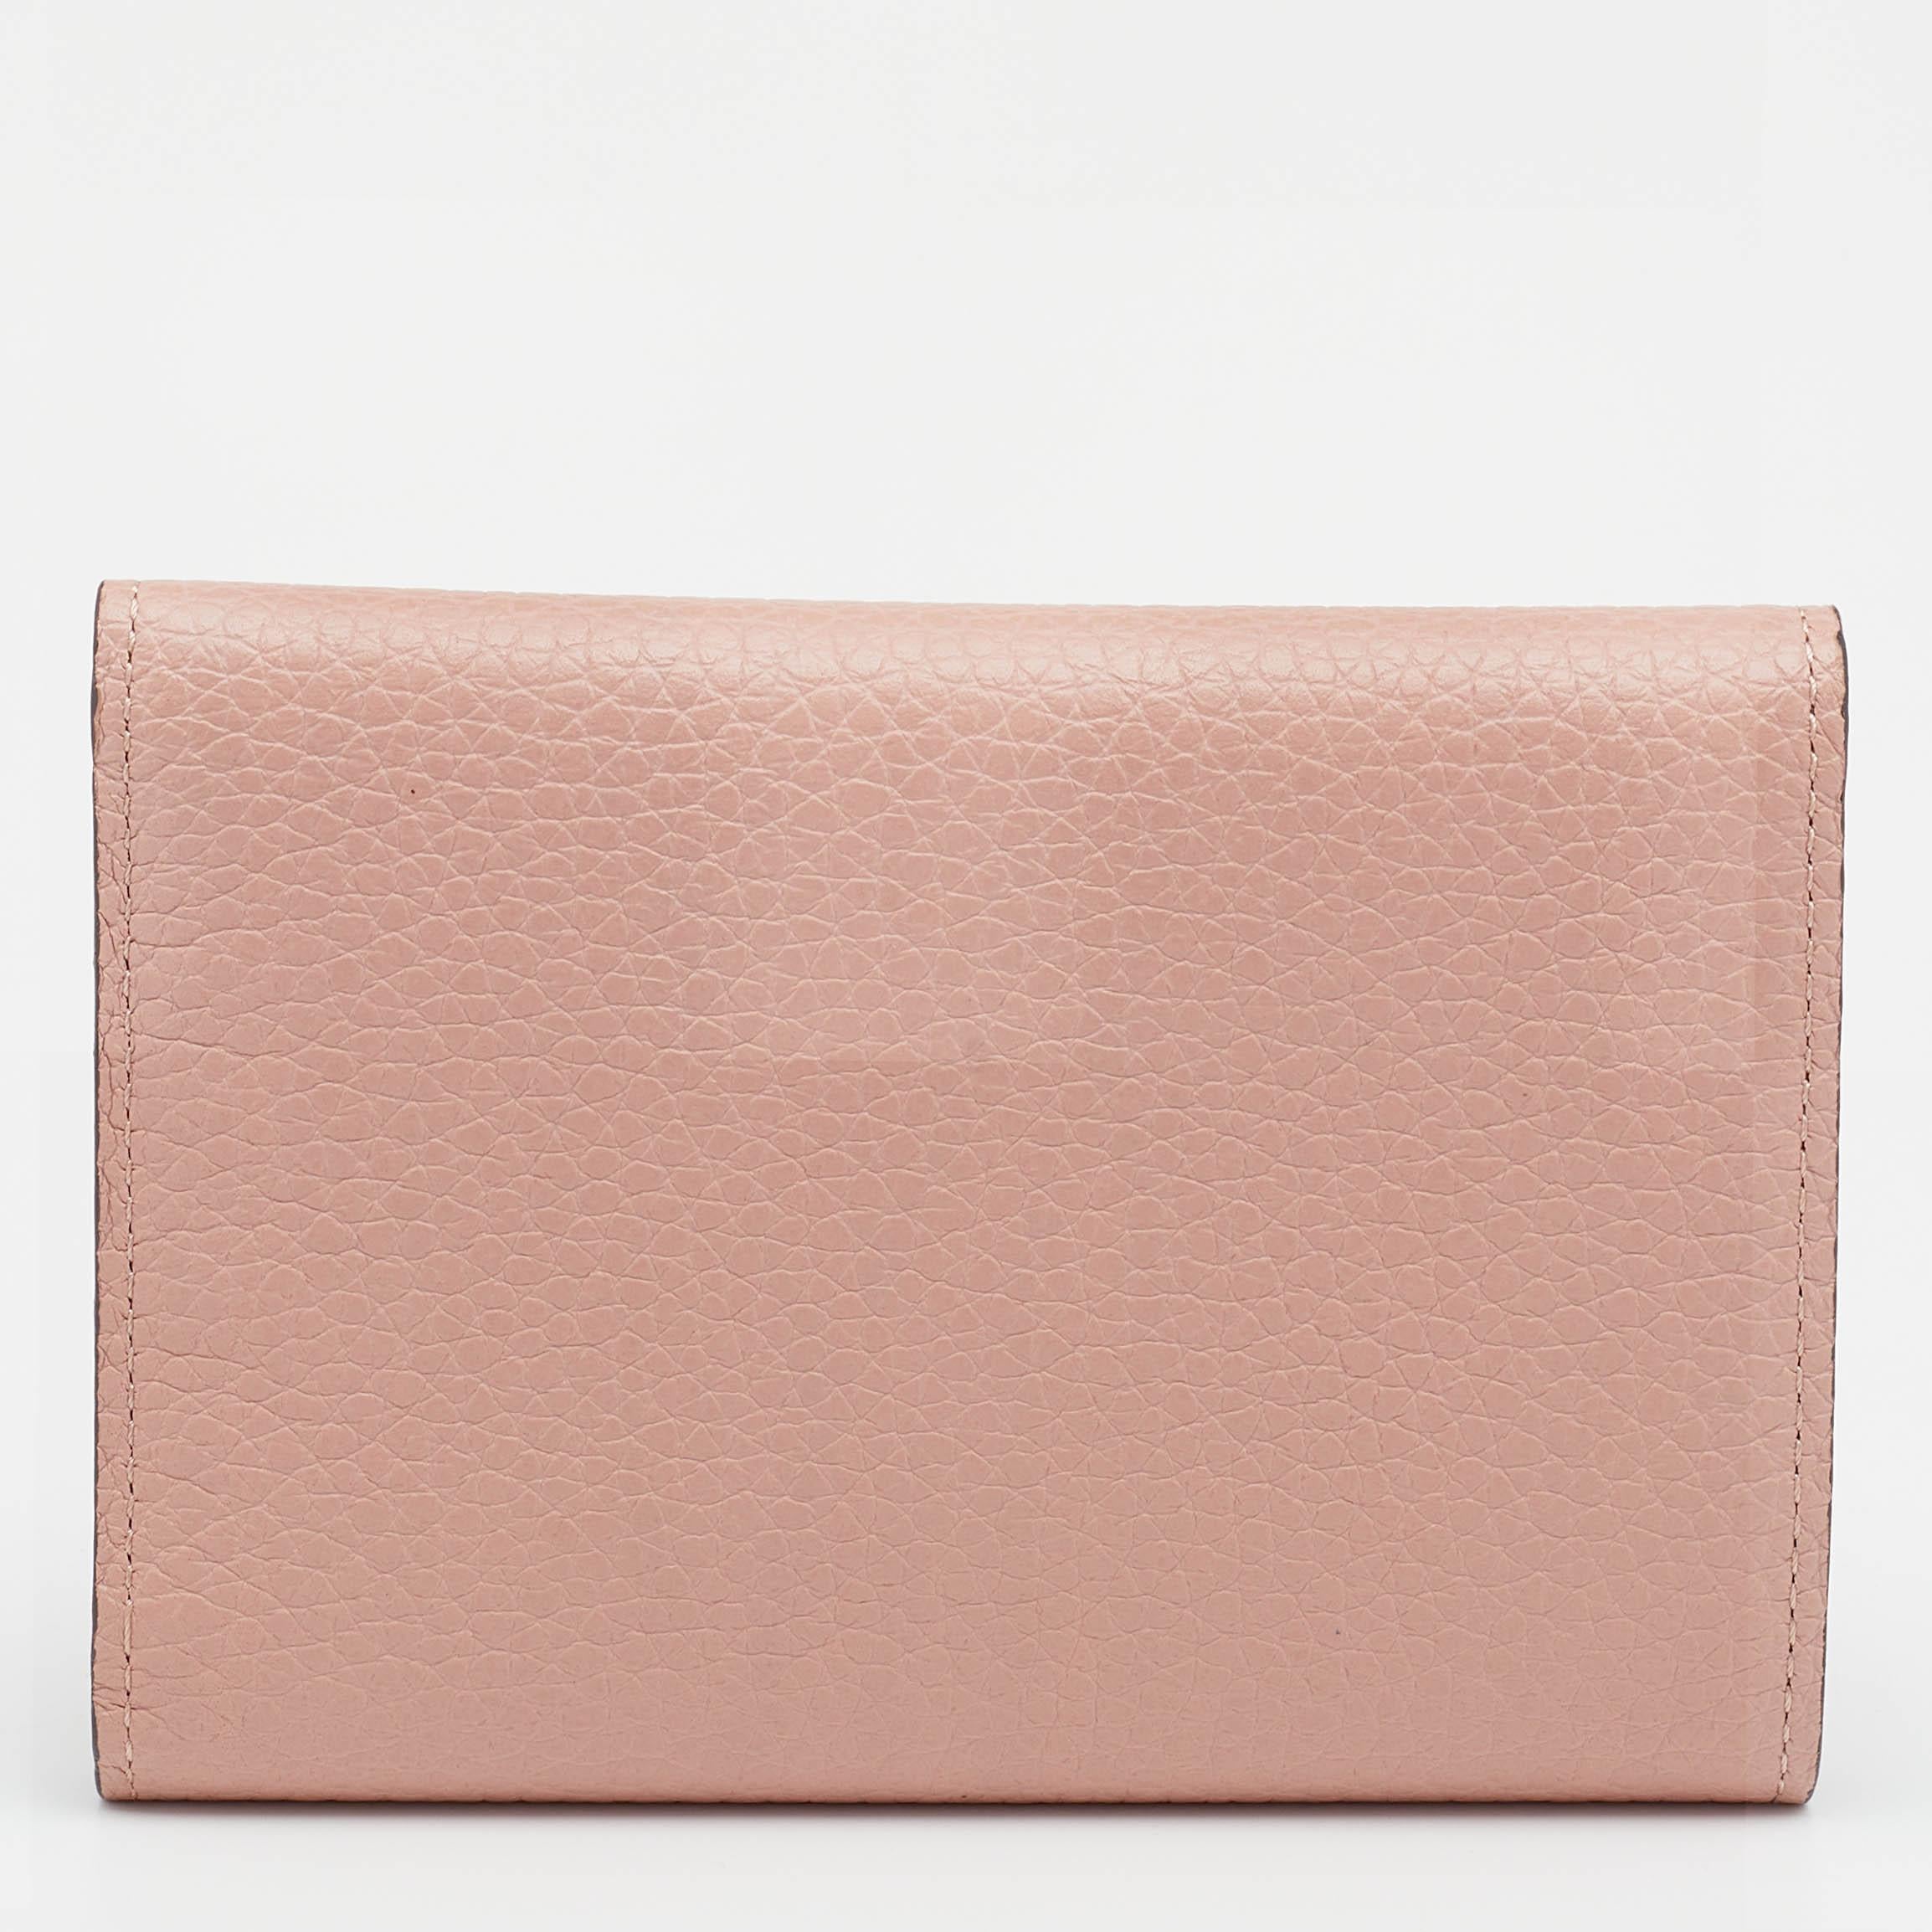 It is every woman's dream to own a Louis Vuitton creation as appealing as this one. Crafted from leather, this compact wallet features a structured design. While the front logo elevates its beauty, the well-sized interior will dutifully hold all